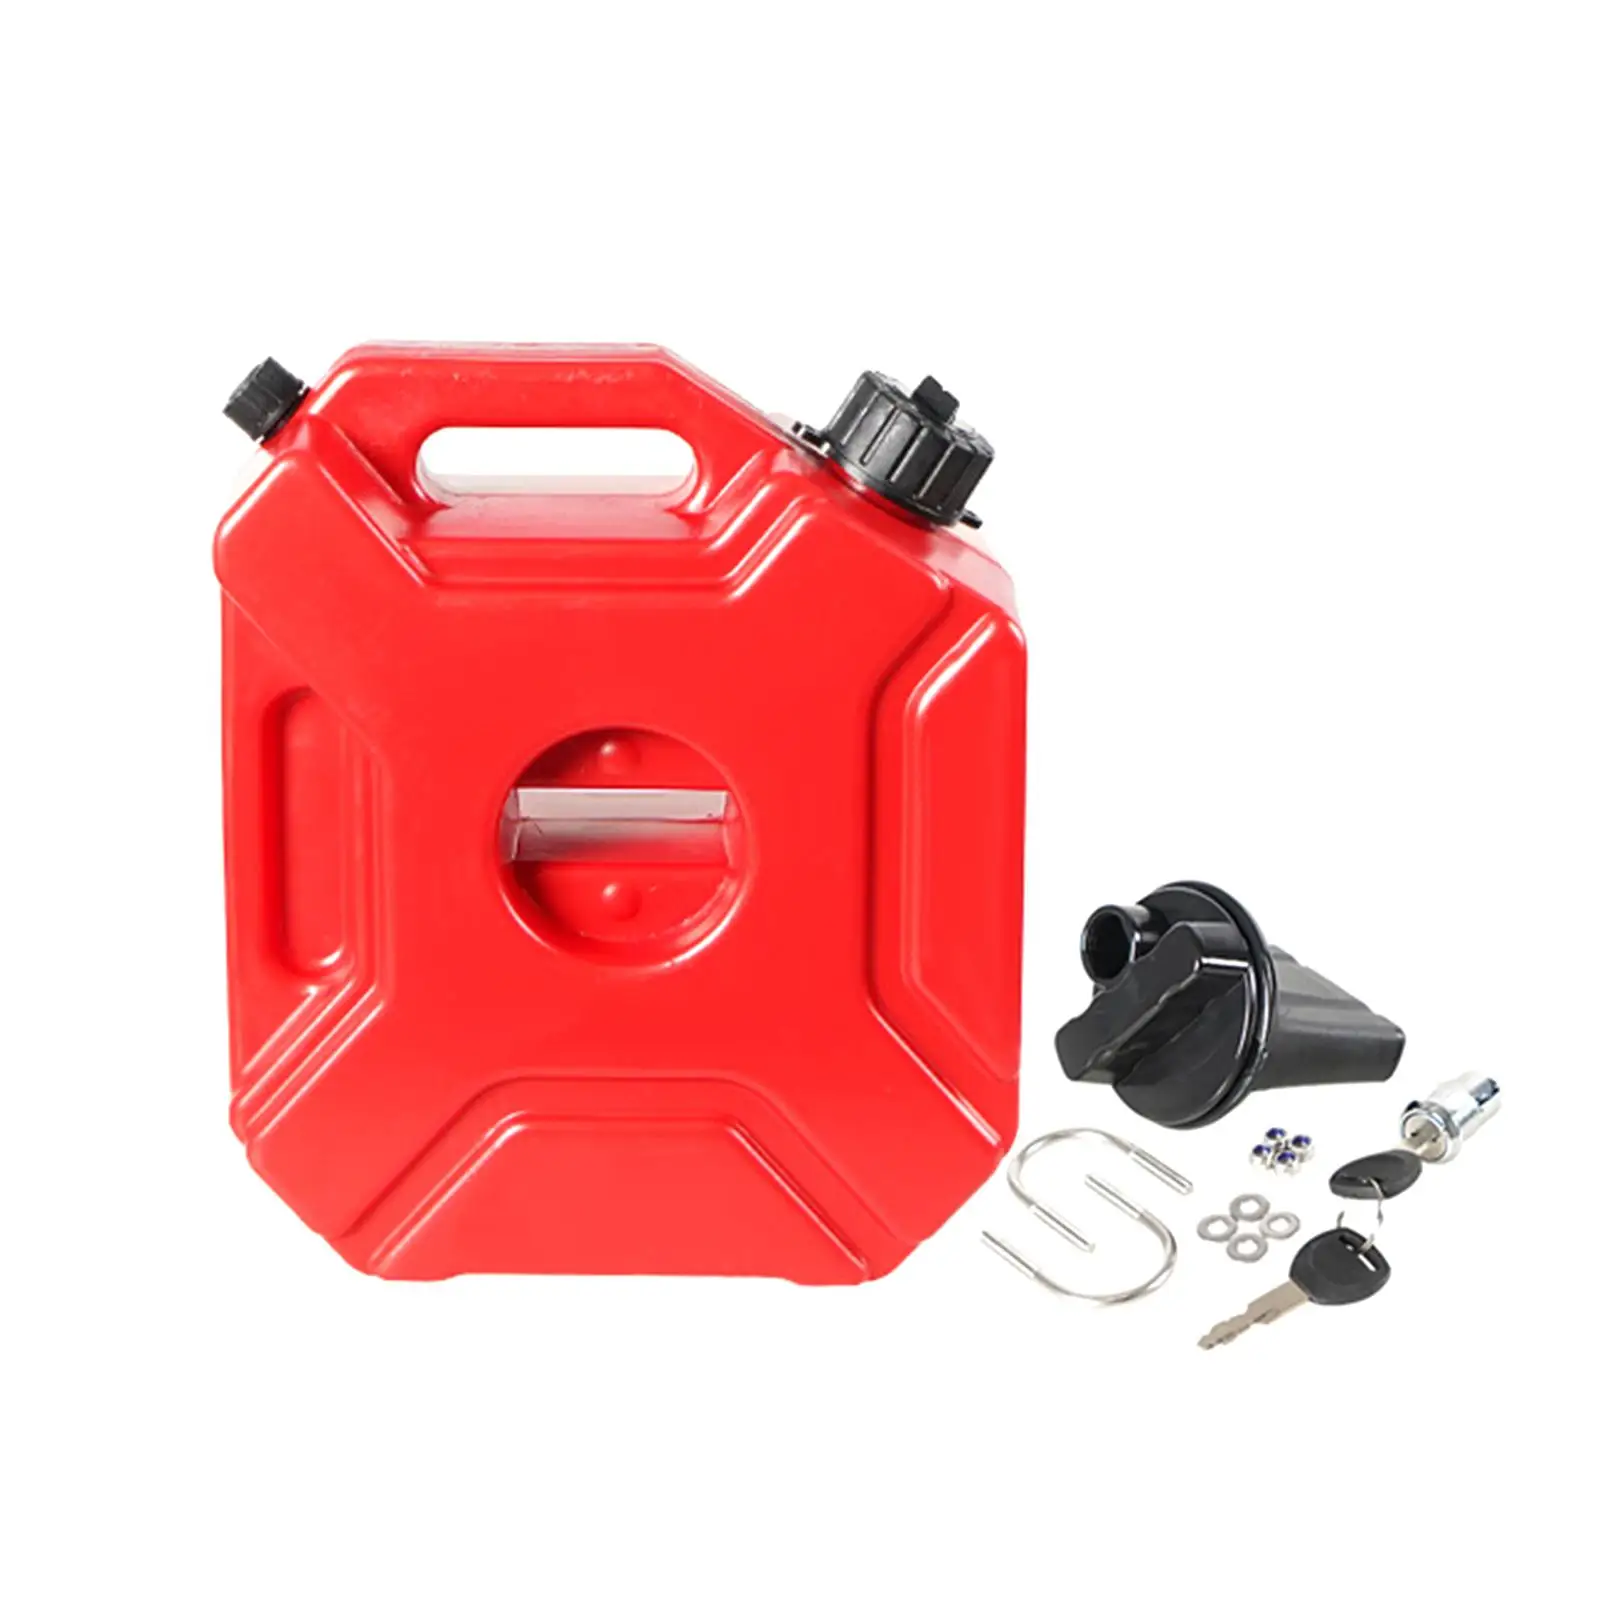 Petrol Tanks 5L Easily Install with Lock Universal Fuel Tank Cans Spare for Motocross Car Travel Most Cars SUV Parts